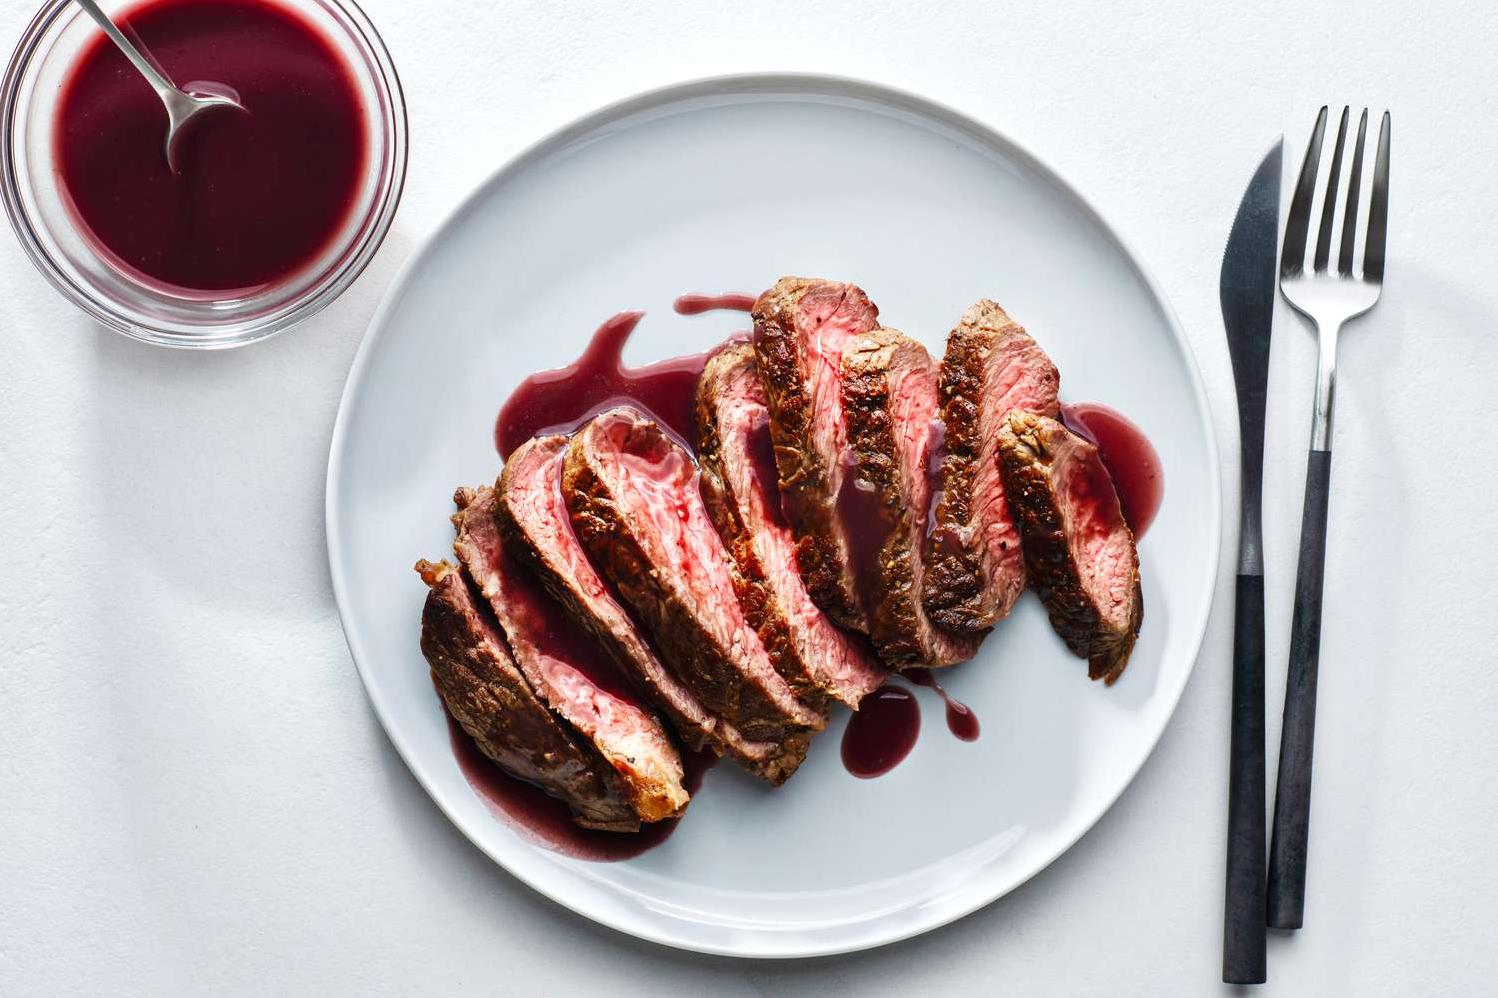  Step up your cooking game with this delectable and versatile Merlot sauce.